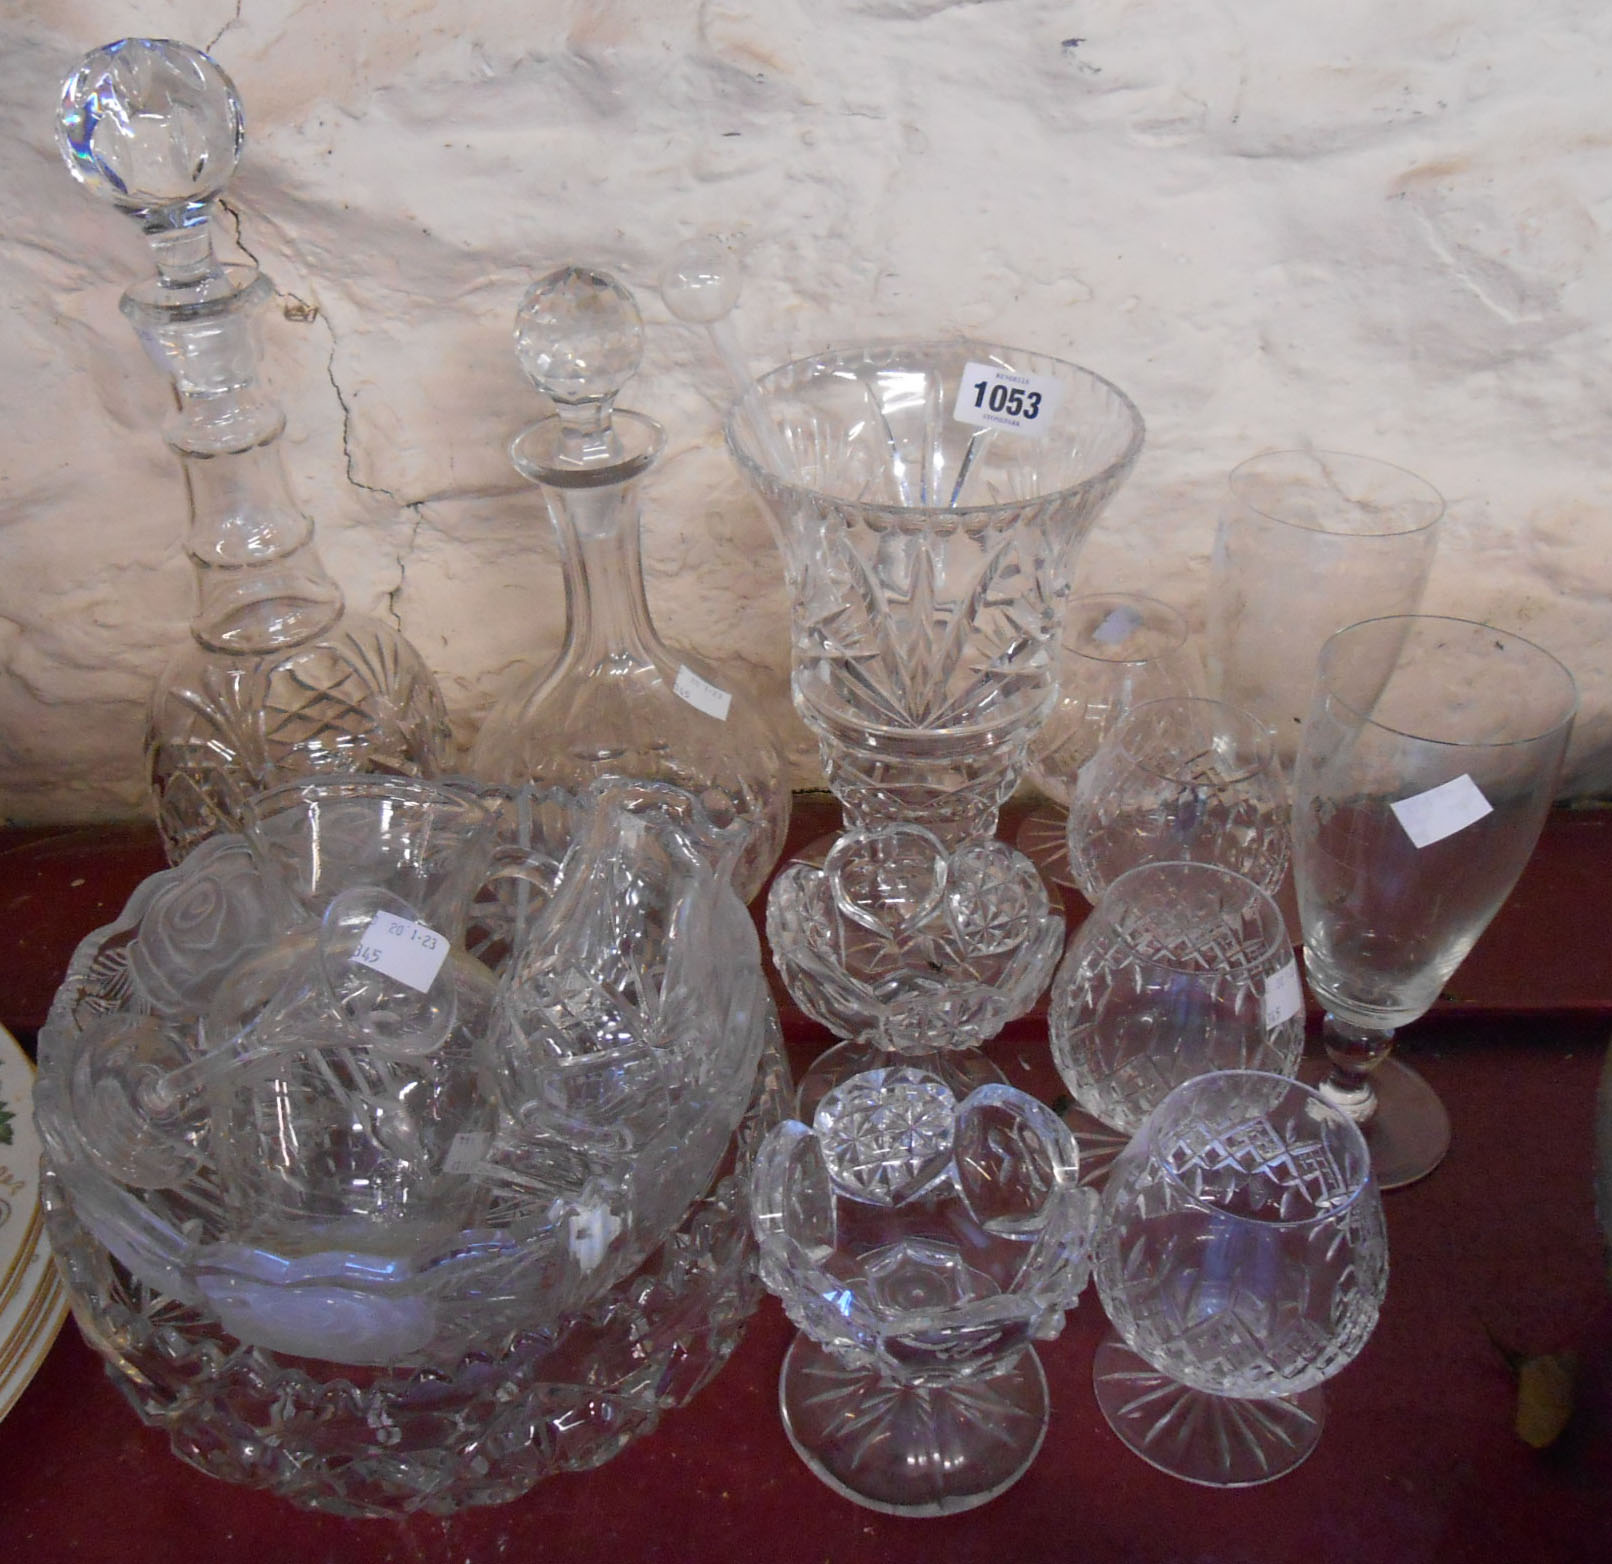 A quantity of assorted cut and other glassware including vases, decanters, bowls, etc.